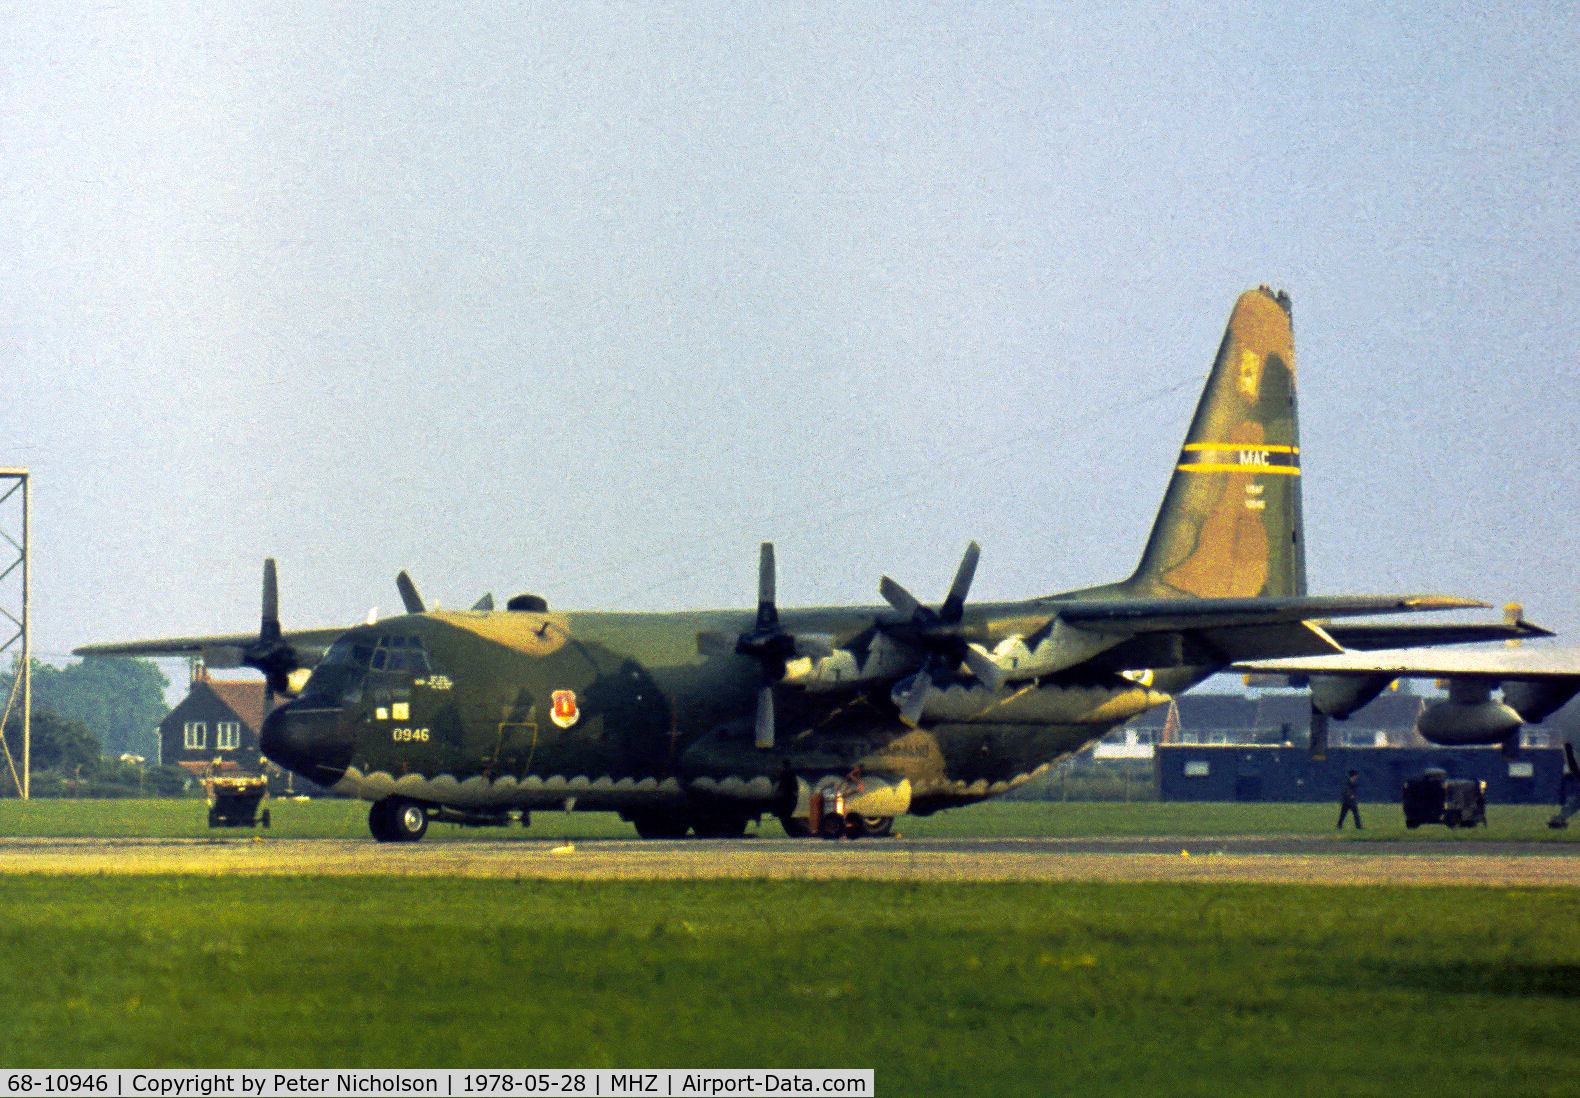 68-10946, 1968 Lockheed C-130E Hercules C/N 382-4326, C-130E Hercules of the 317th Tactical Airlift Wing on dispersal at the 1978 RAF Mildenhall Air Fete.